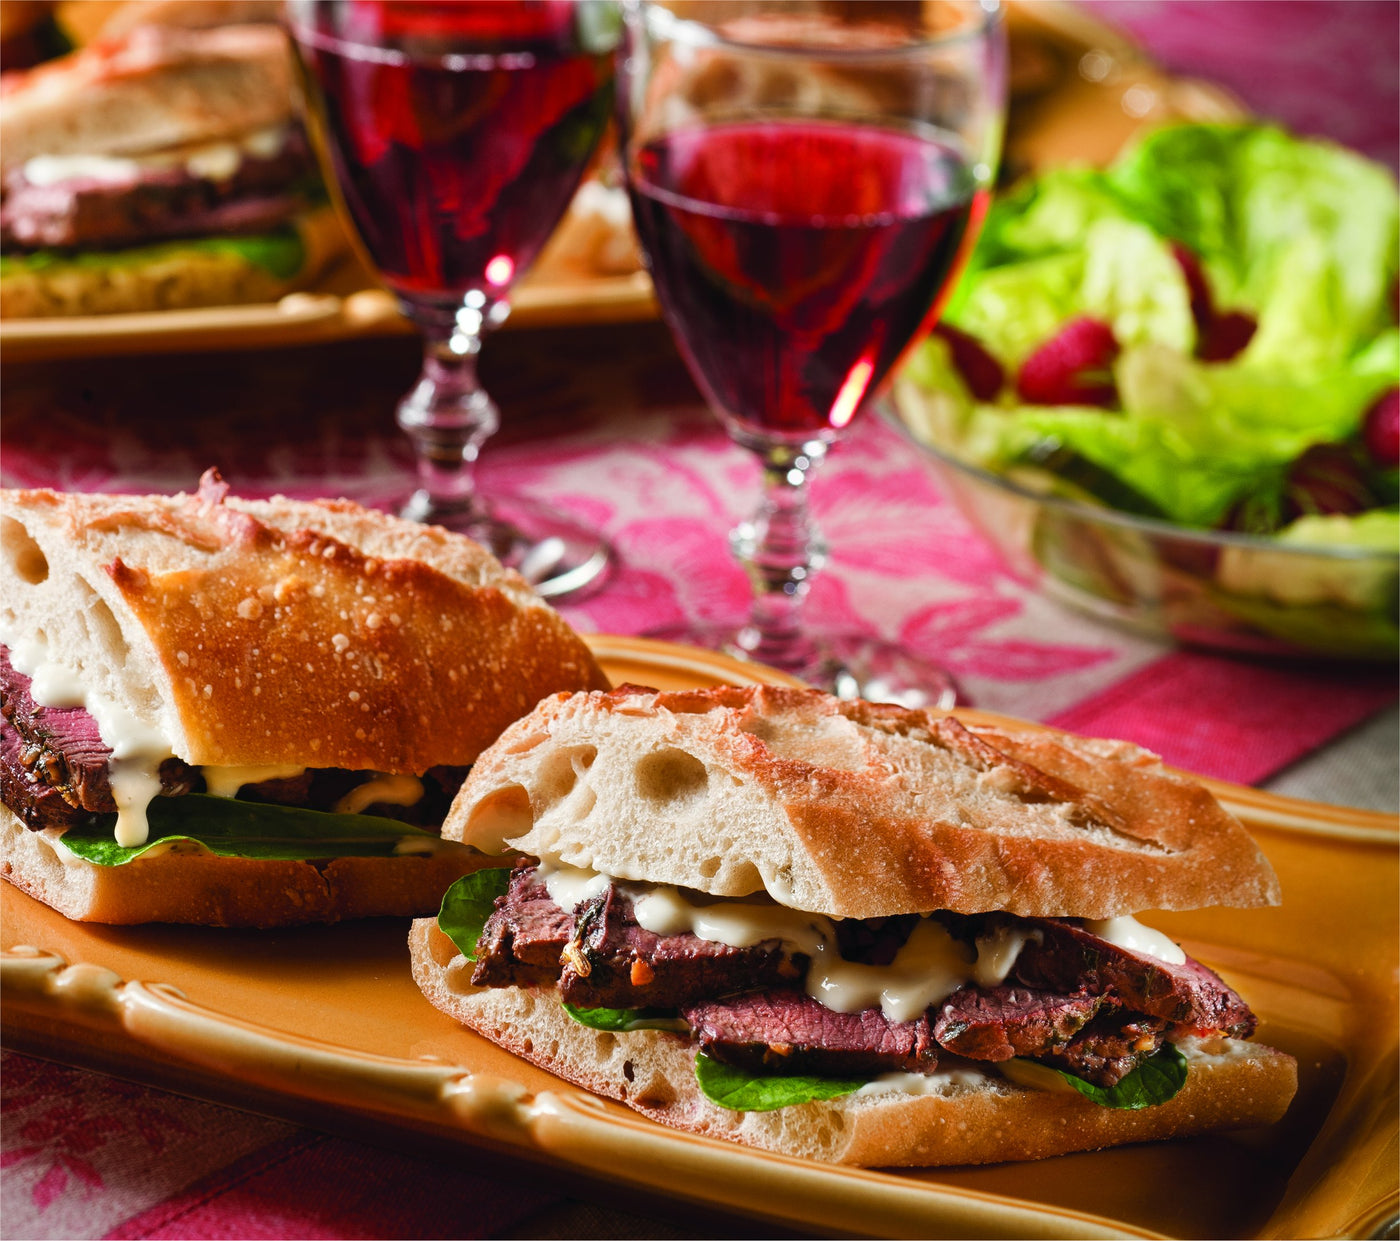 Filet of Beef Sandwiches